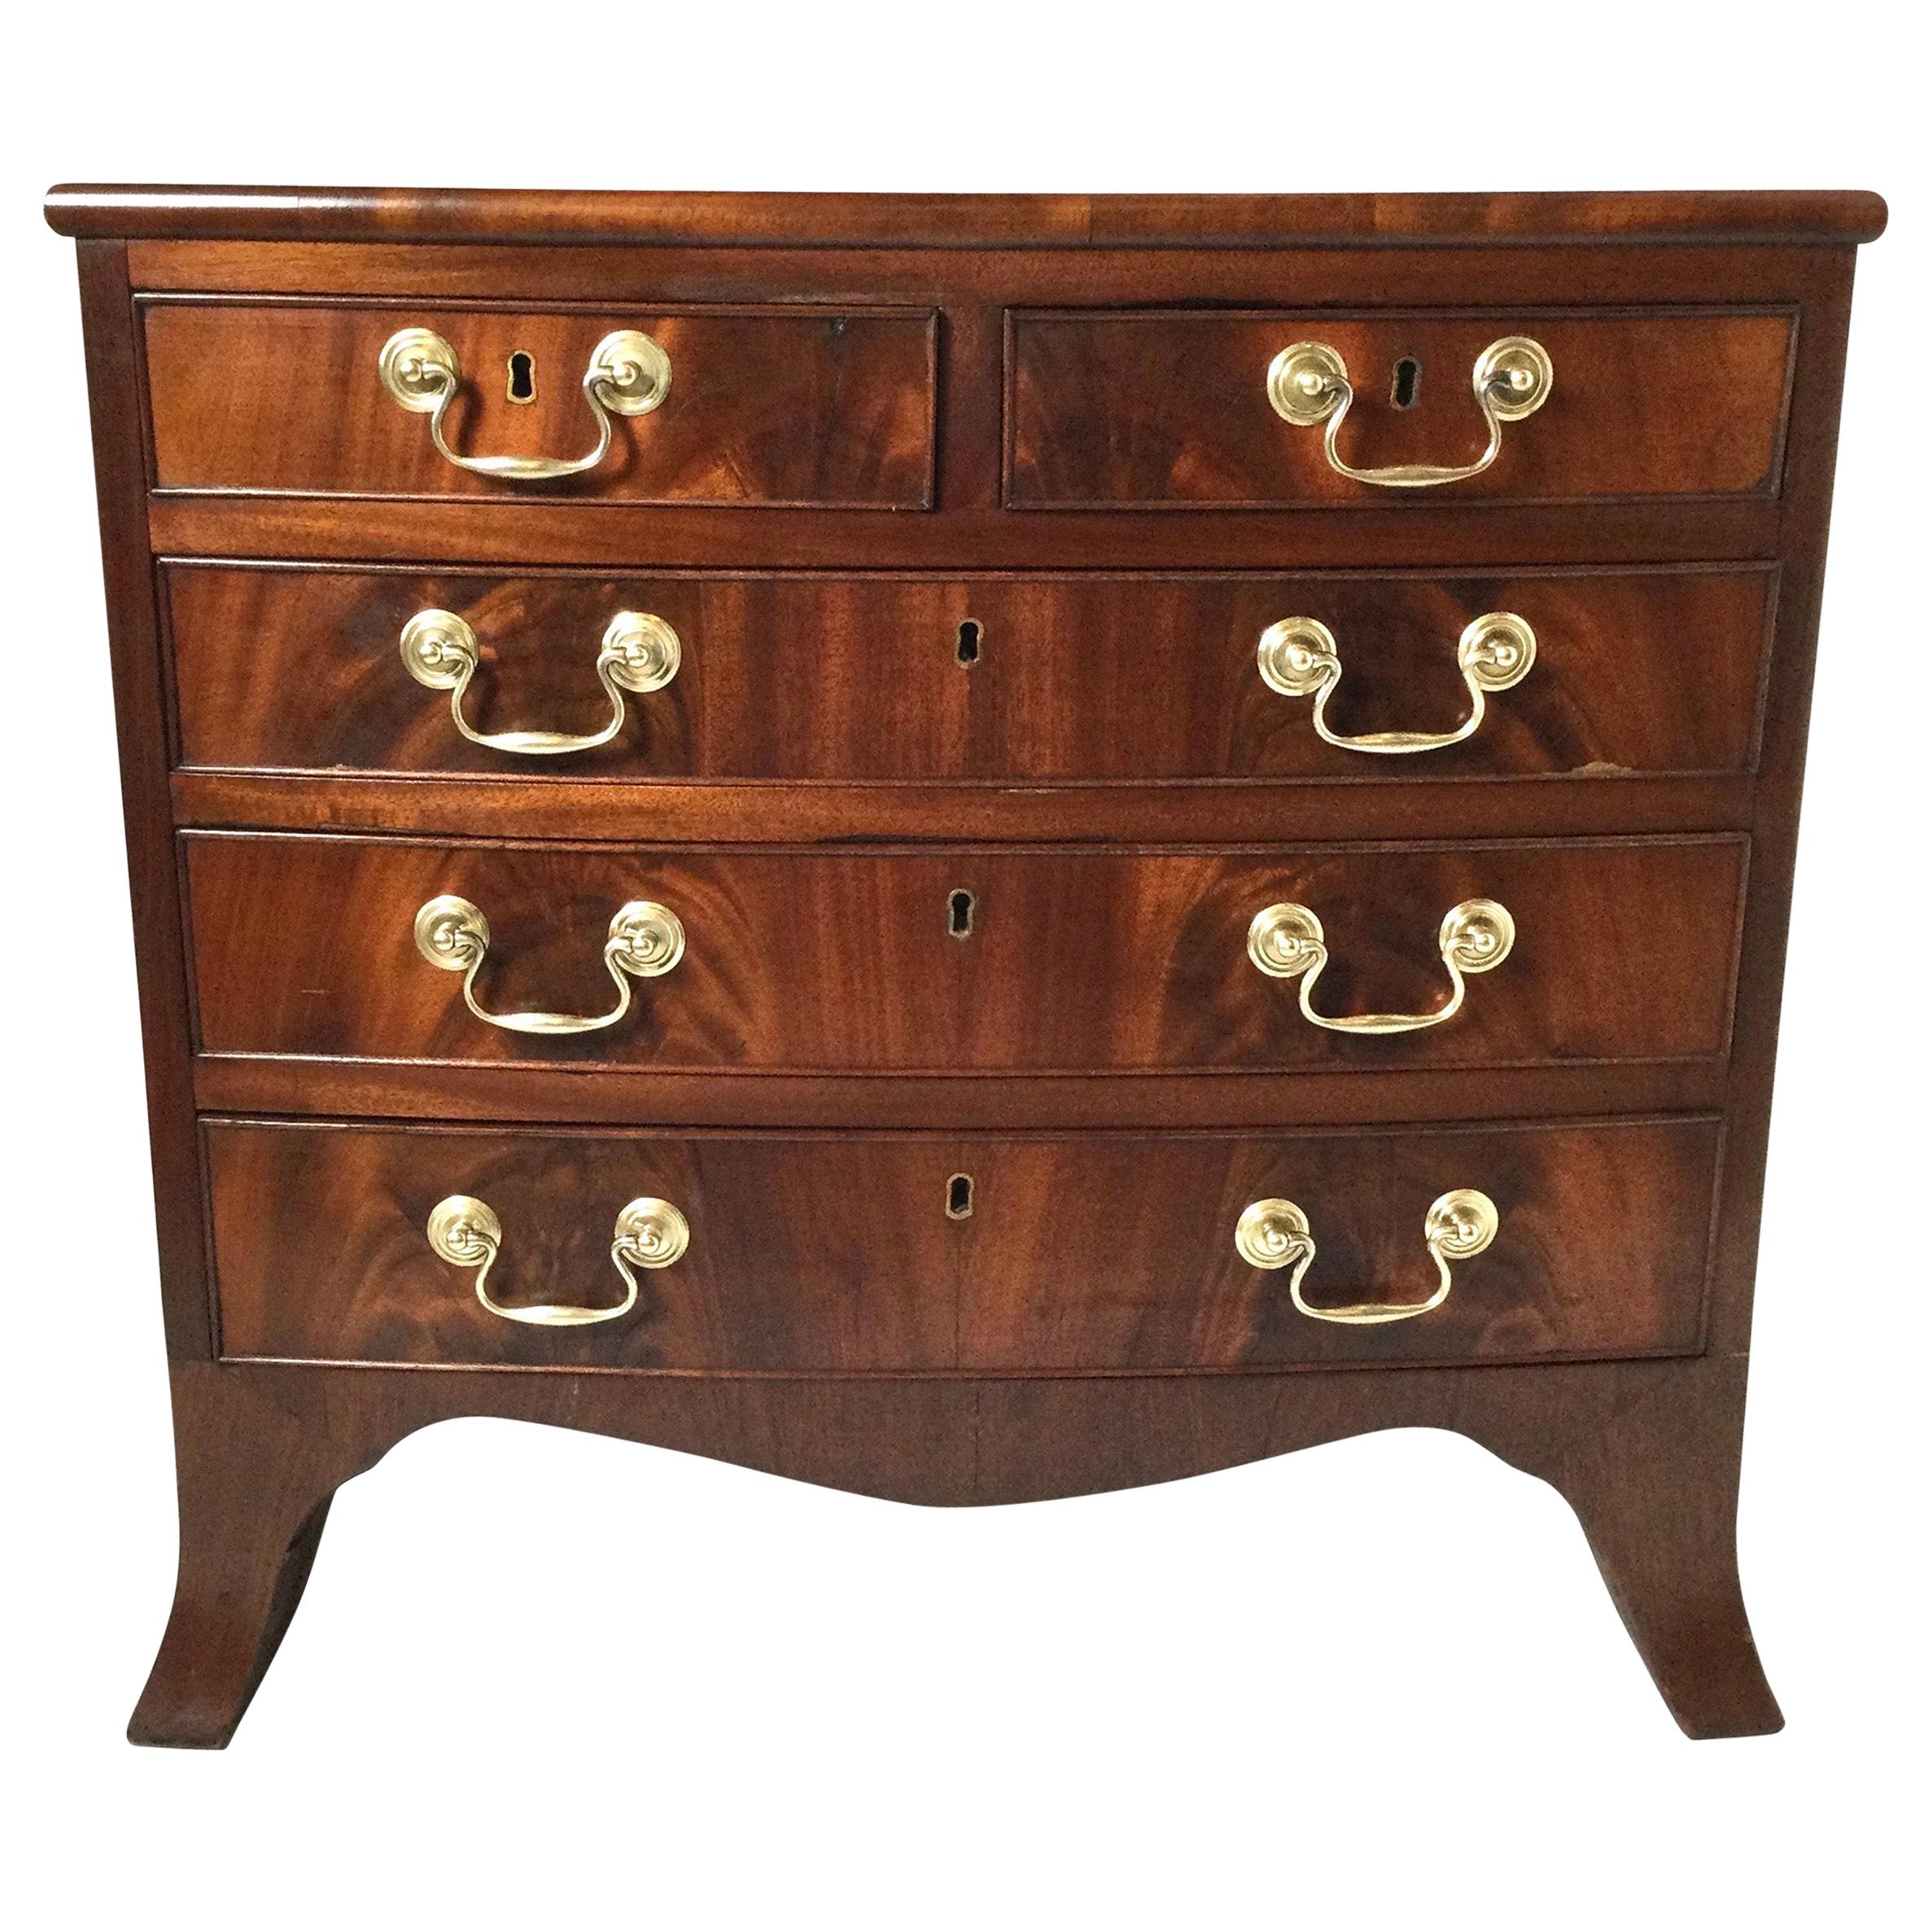 Diminutive Antique English Chest of Drawers Circa 1875